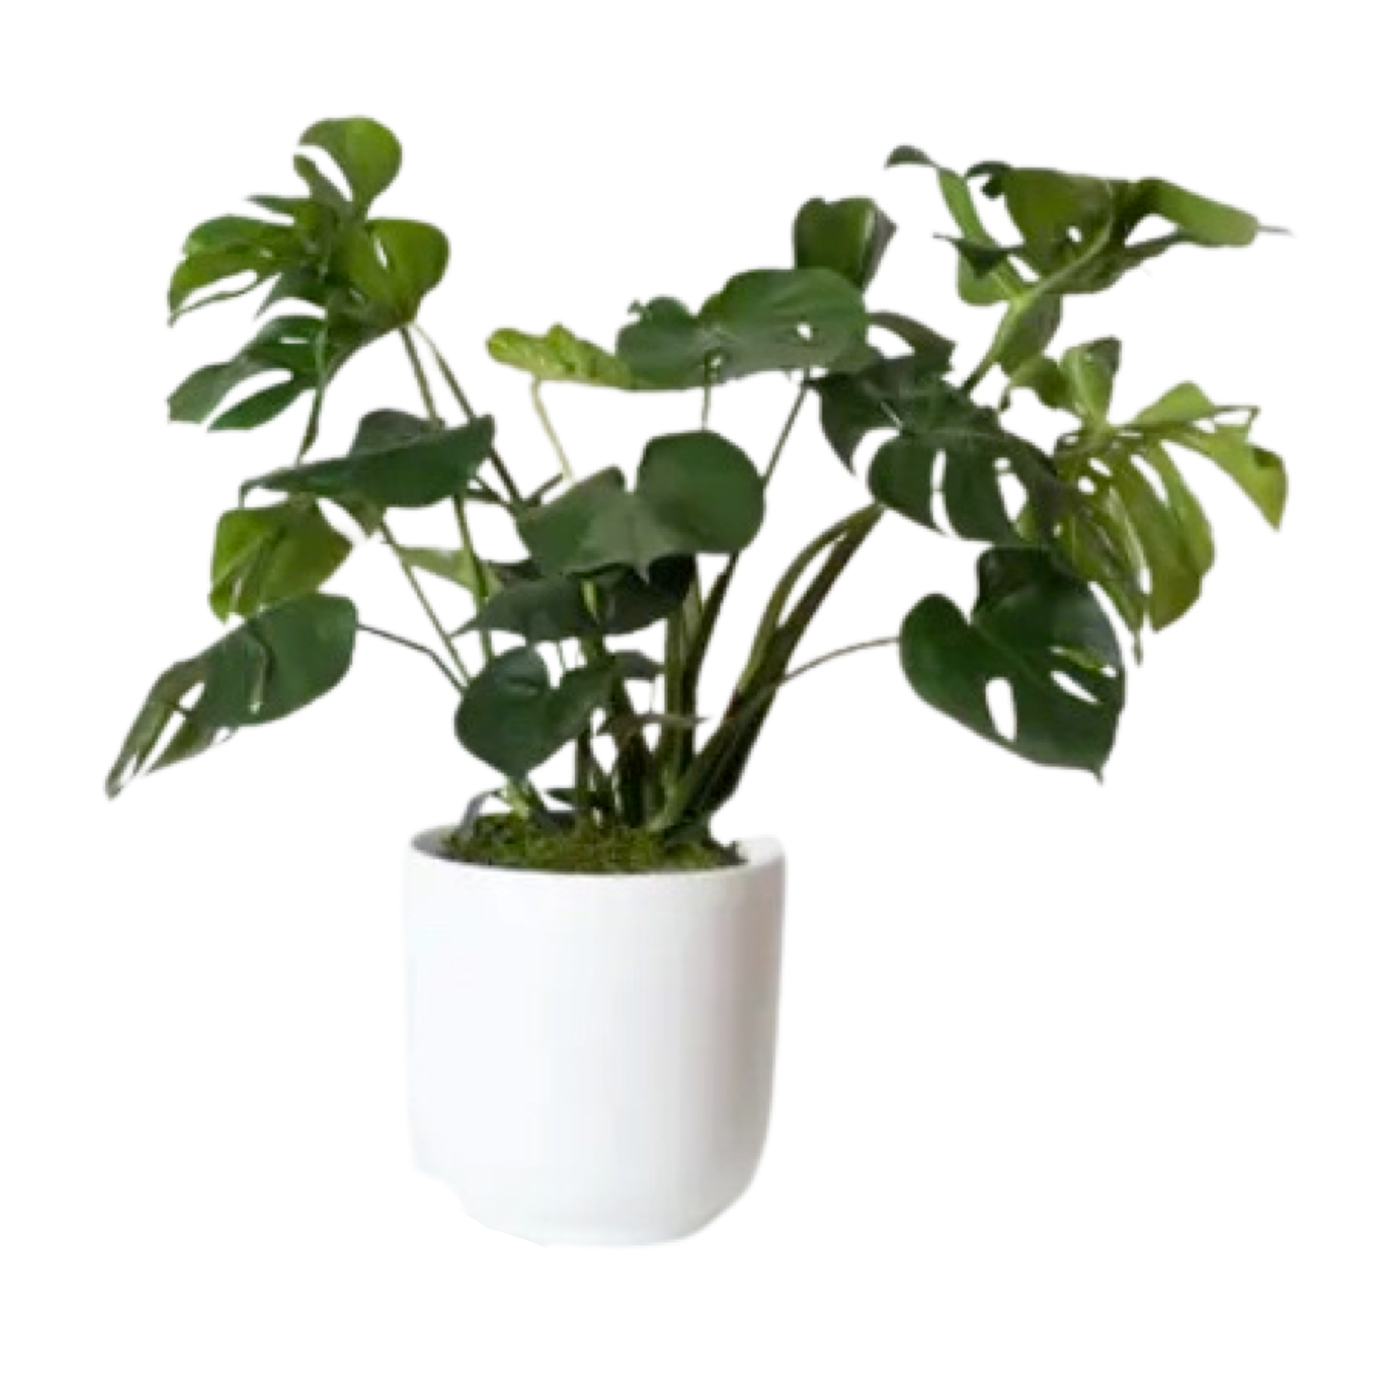 Monstera 2-3 ft. tall (Delivery & Setup Included)